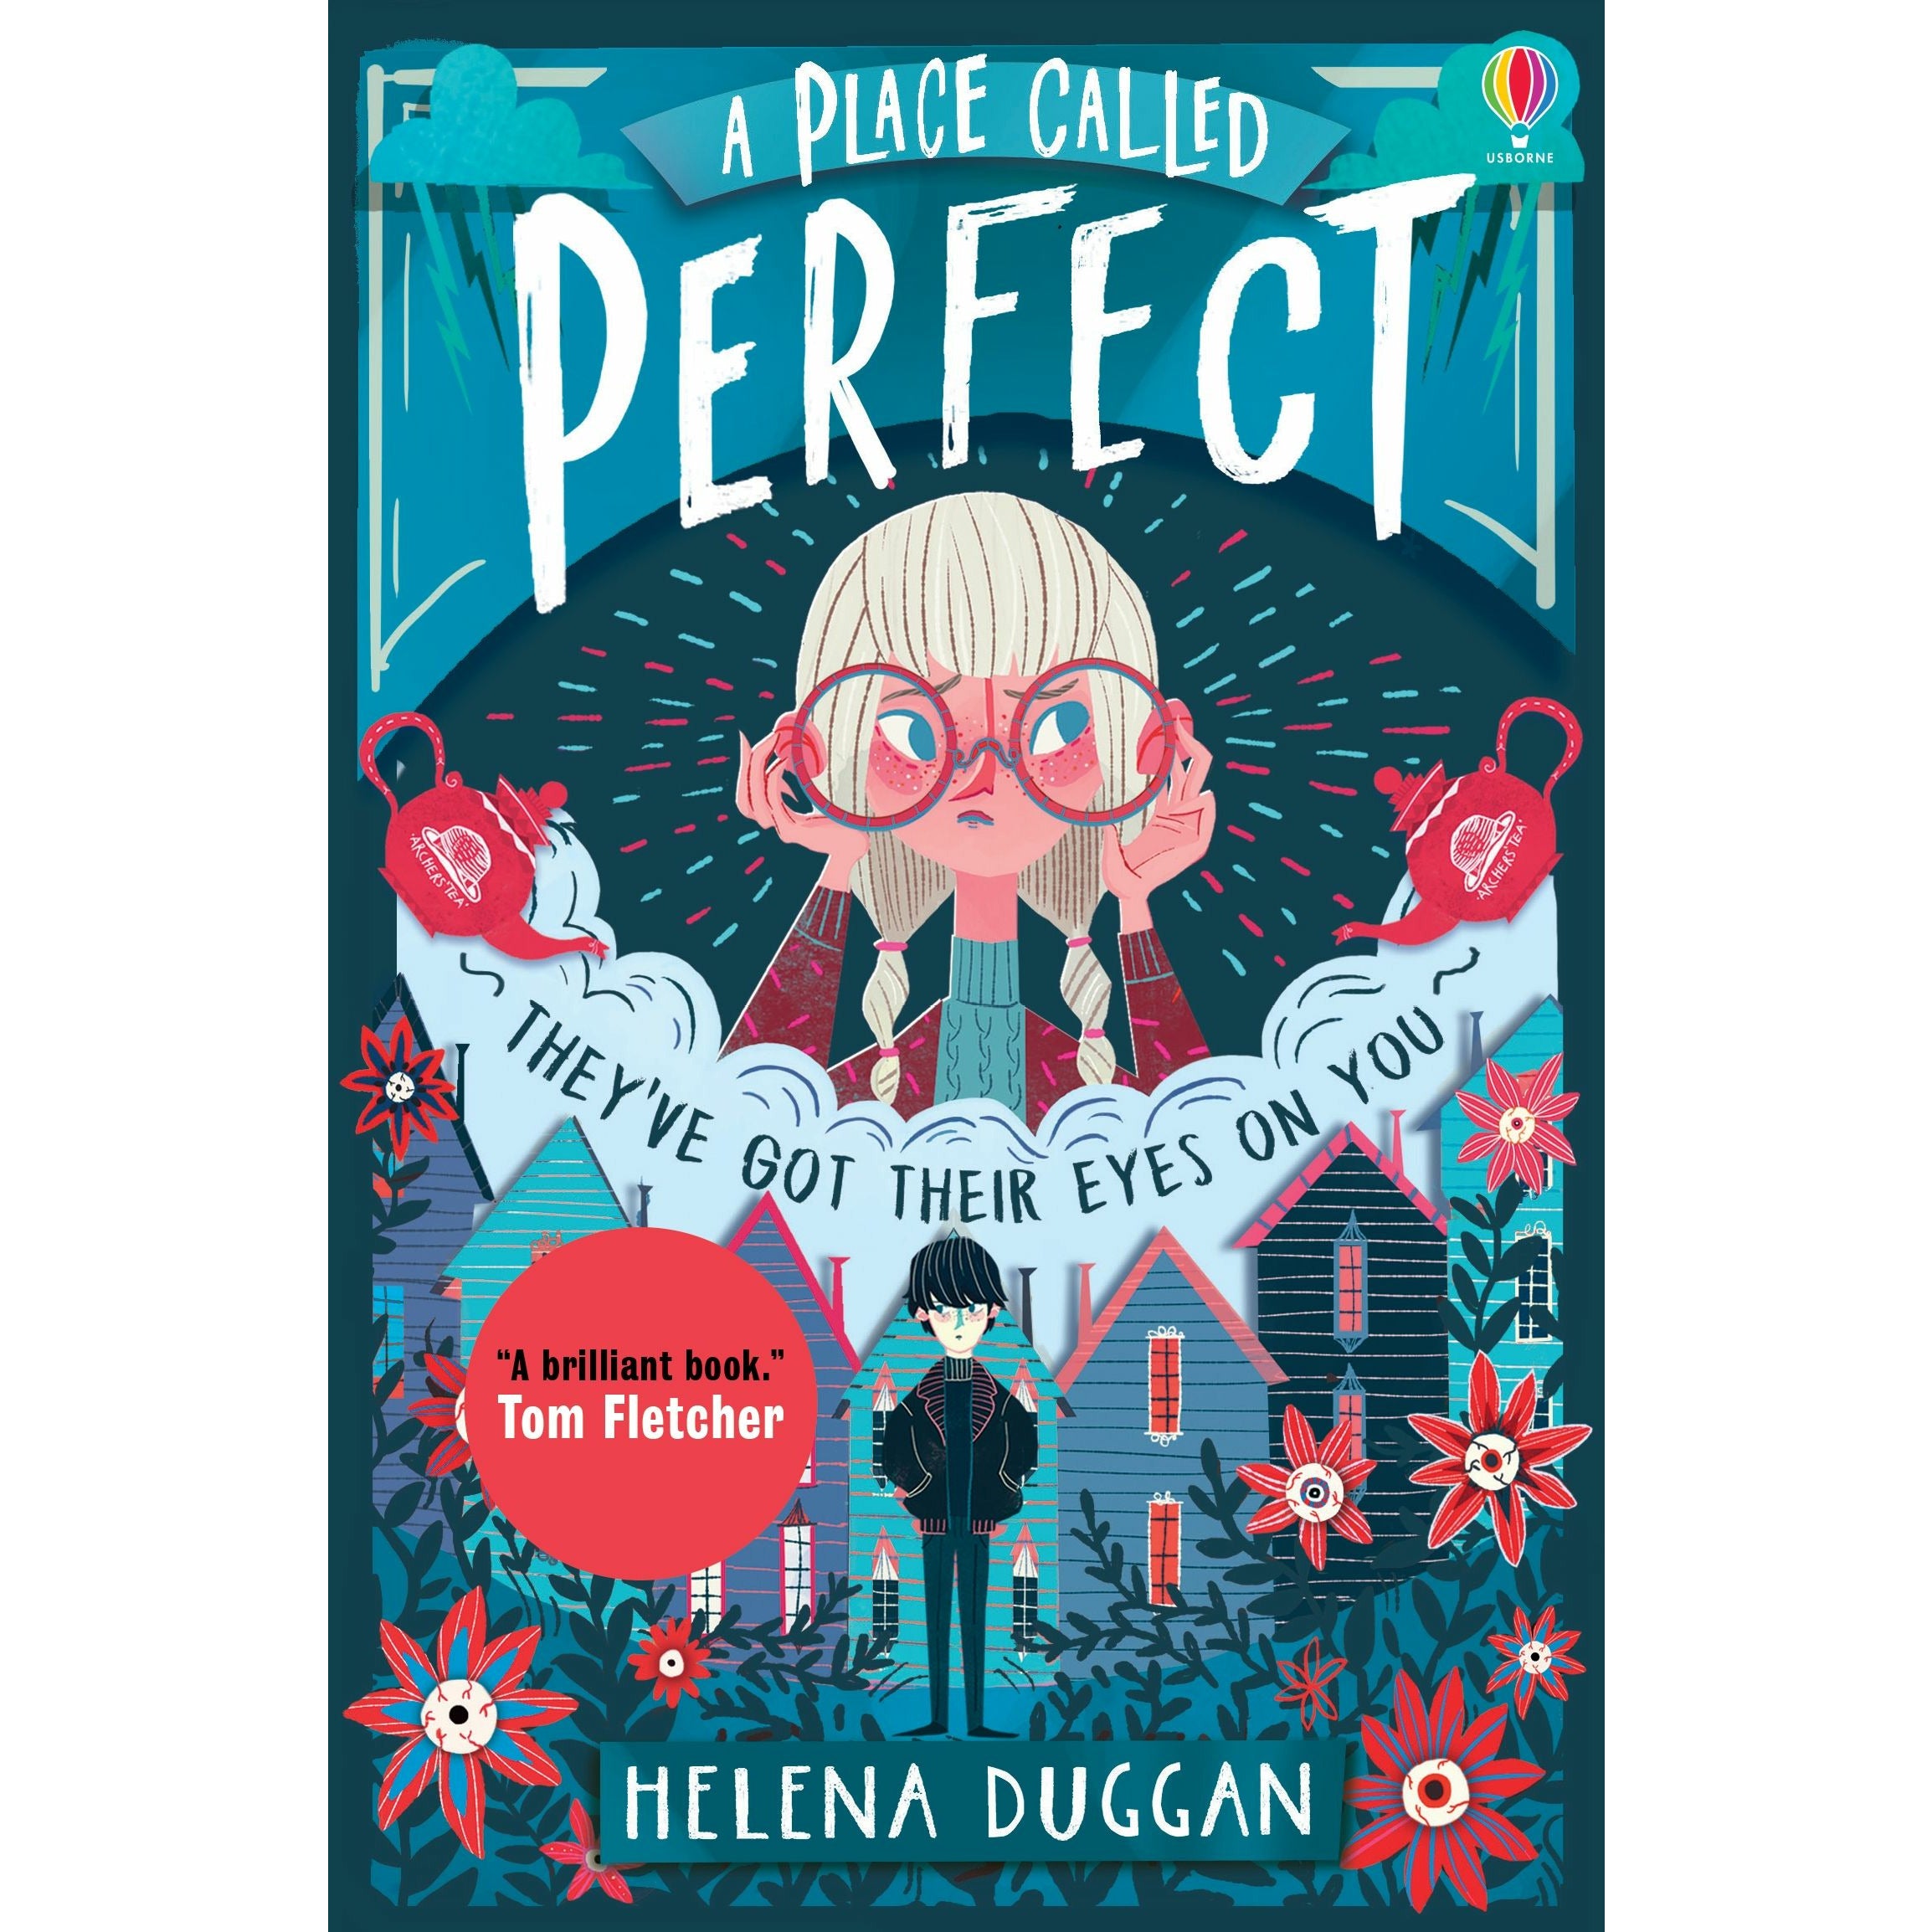 A Place Called Perfect - Helena Duggan - Book 1